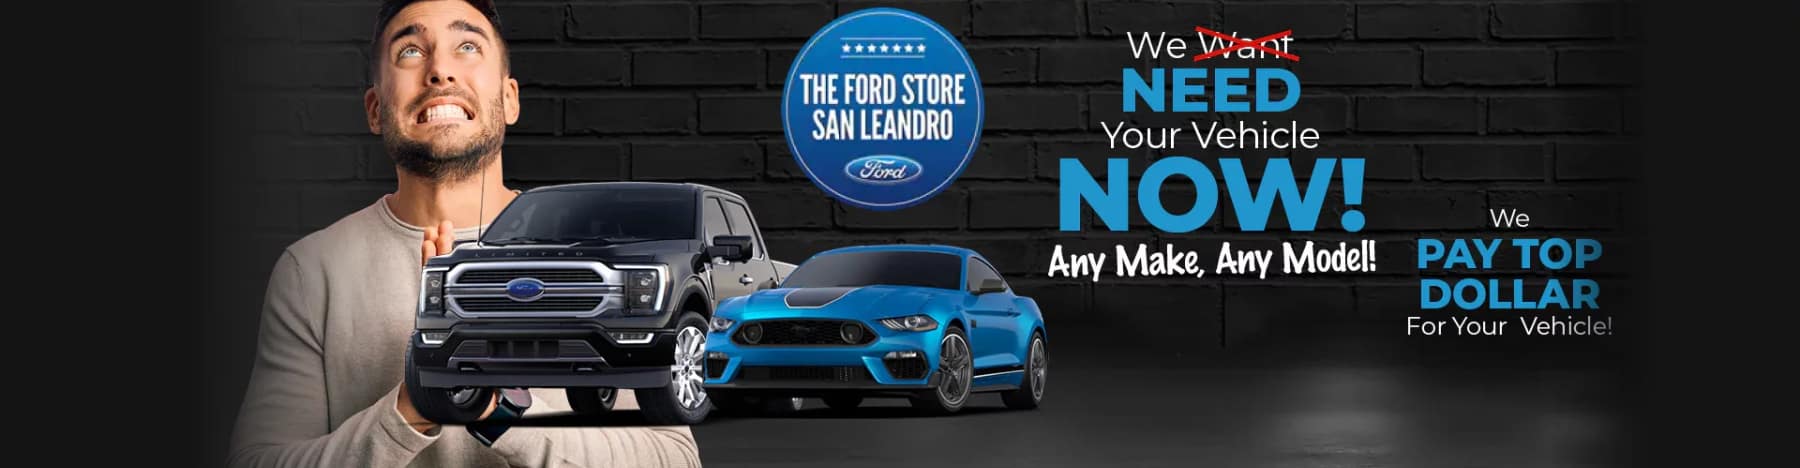 We'll Buy Your Car at The Ford Store San Leandro!